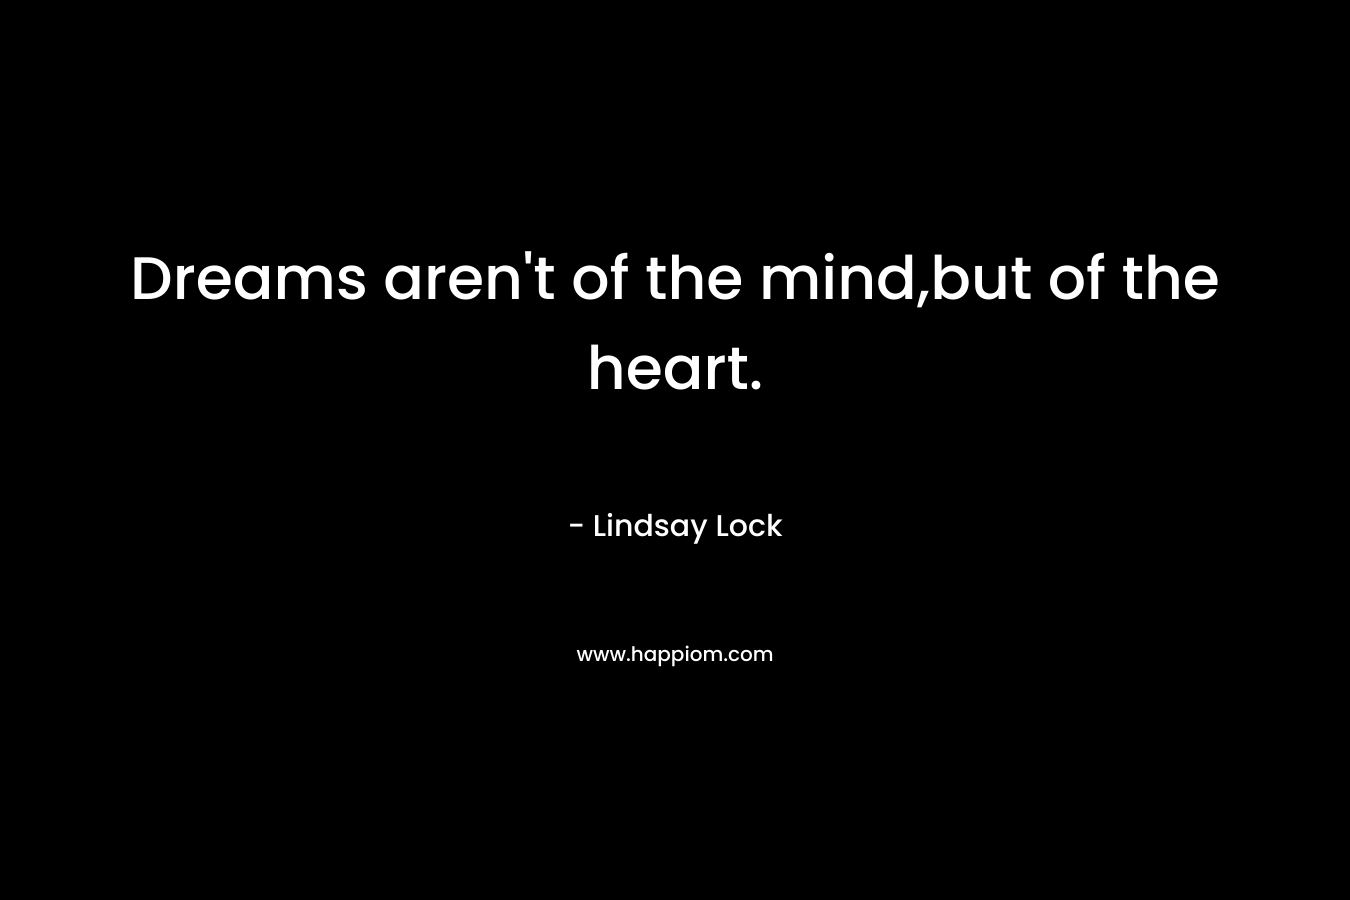 Dreams aren't of the mind,but of the heart.